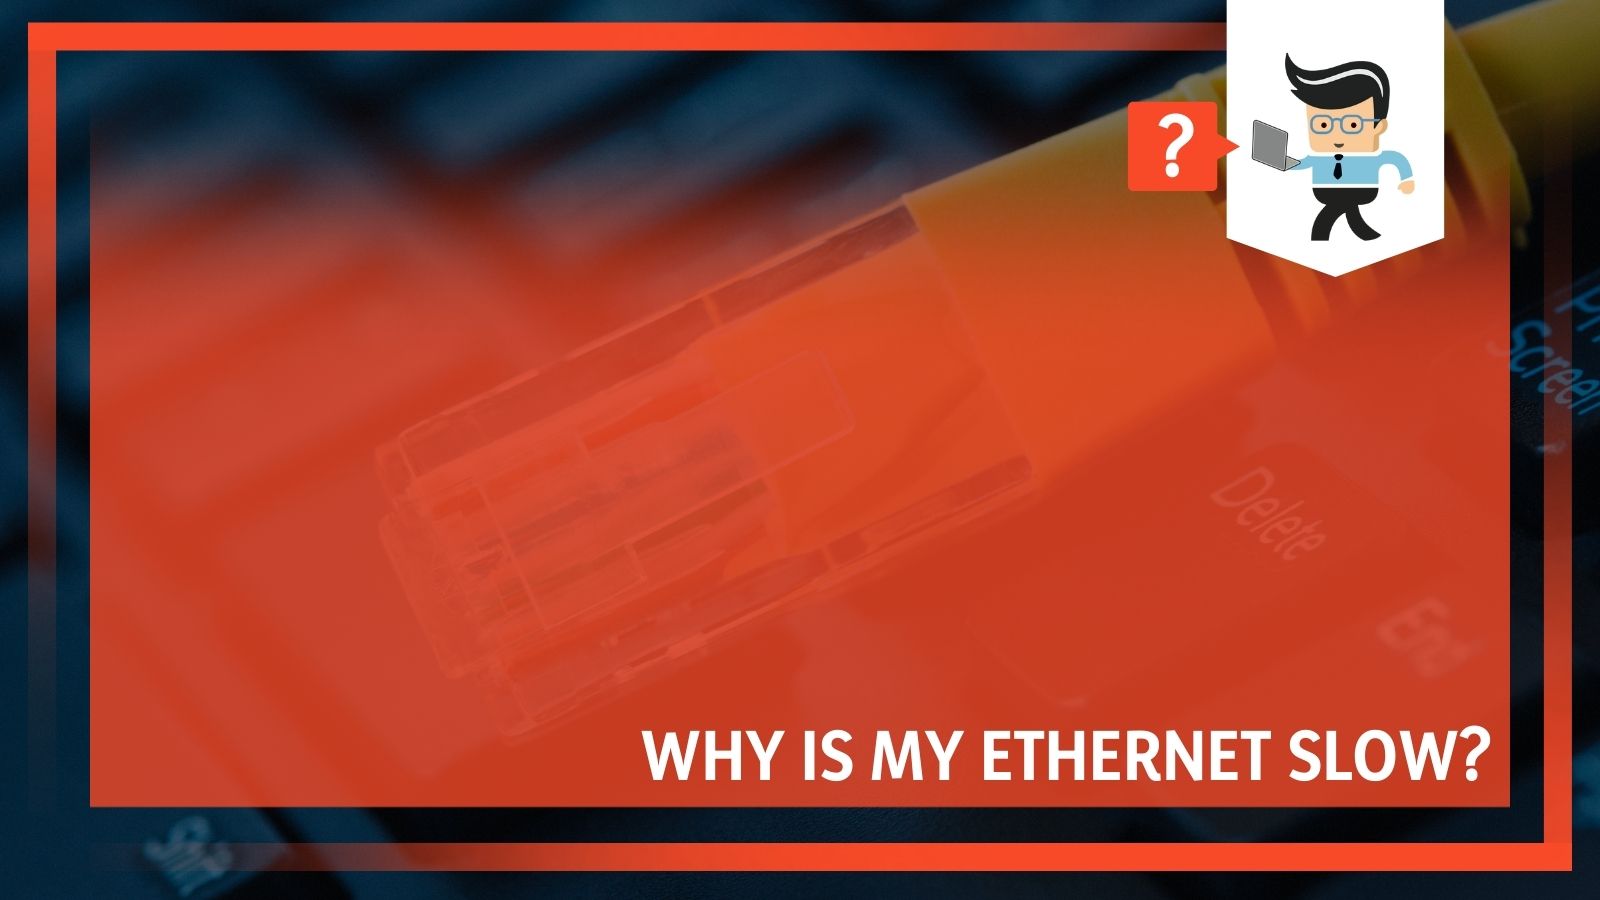 Why is My Ethernet Slow? Find Out Here